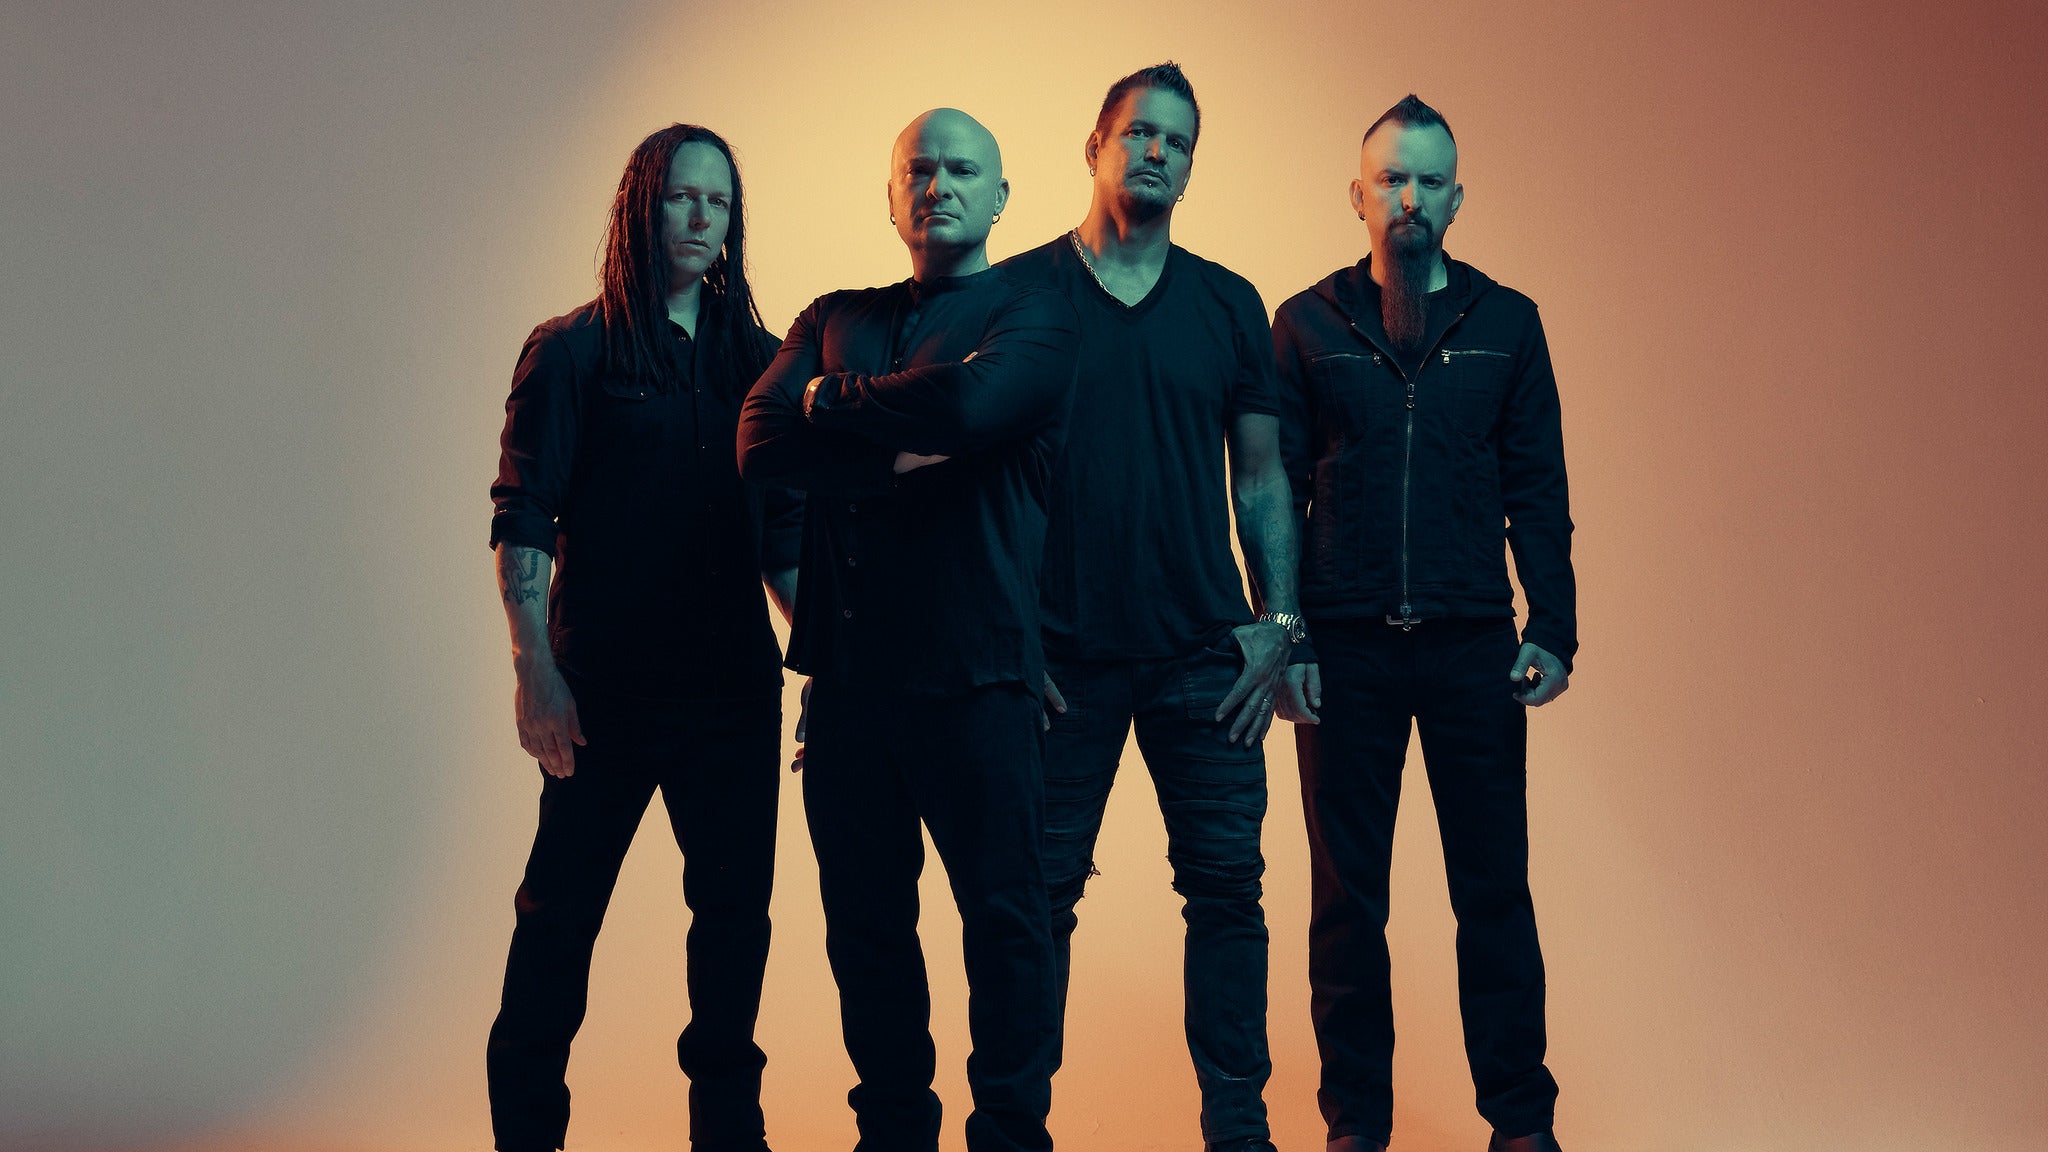 93x Twin City Takeover Starring Disturbed